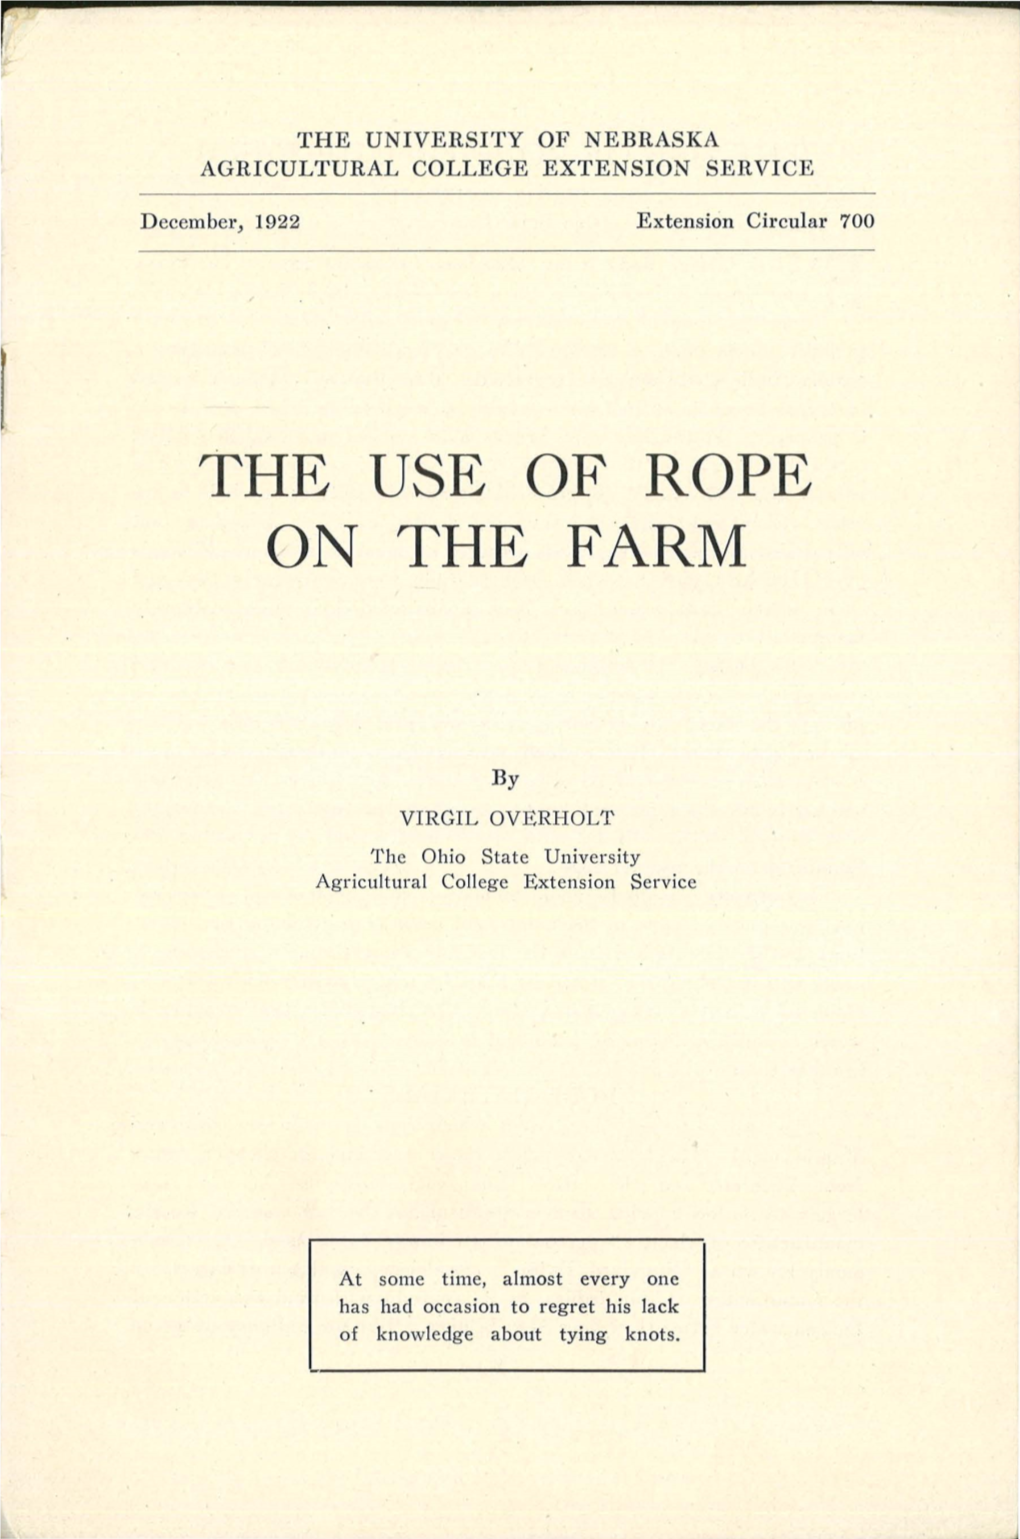 EC700 the Use of Rope on the Farm